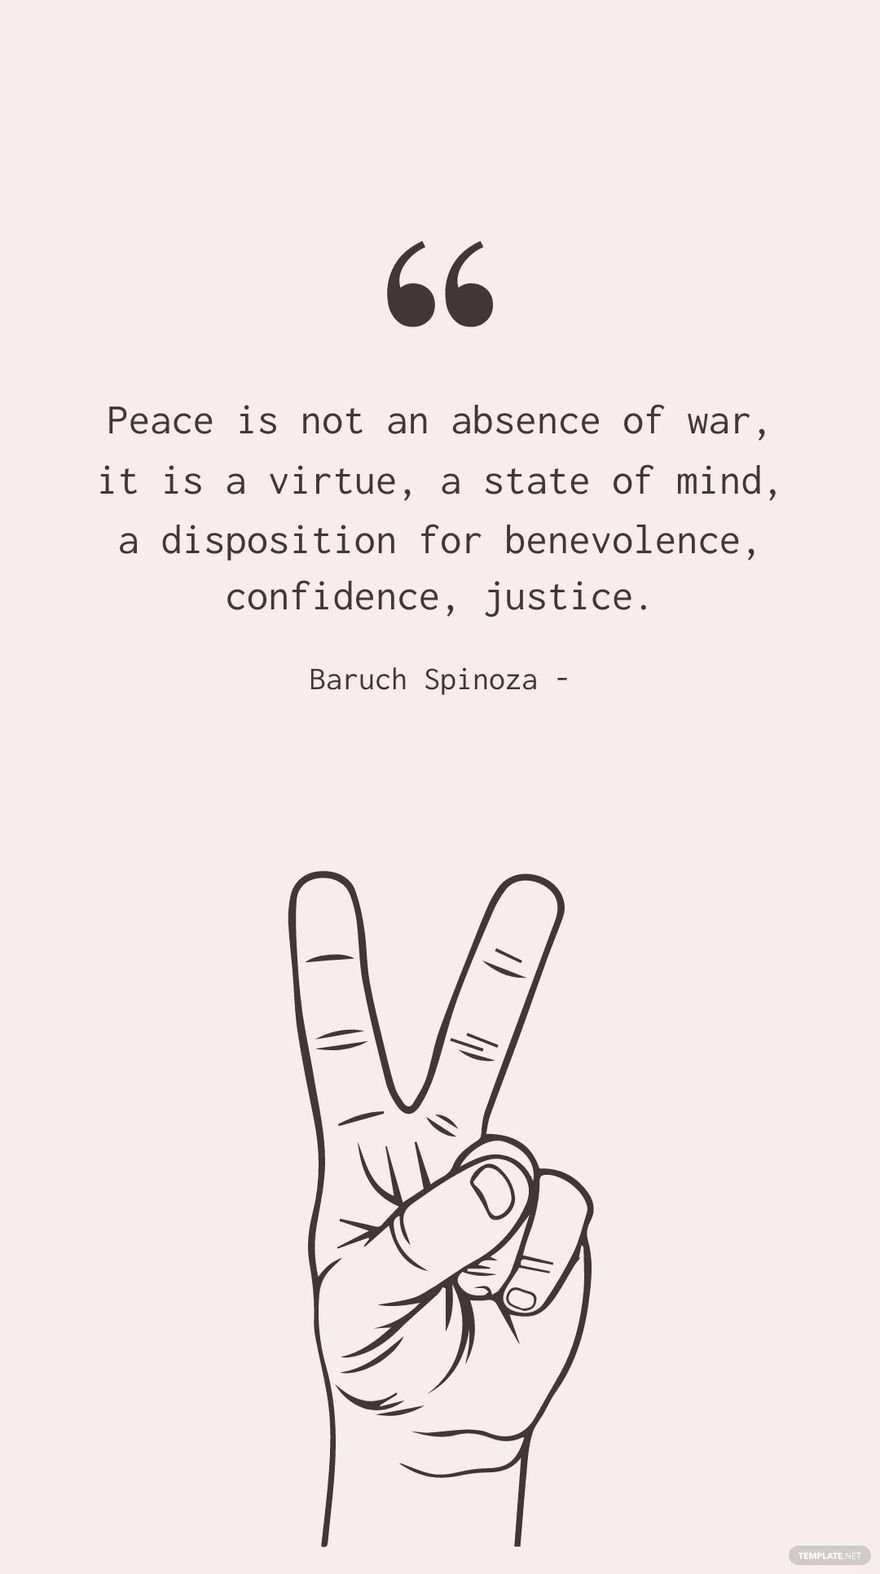 Free Baruch Spinoza - Peace is not an absence of war, it is a virtue, a state of mind, a disposition for benevolence, confidence, justice. in JPG